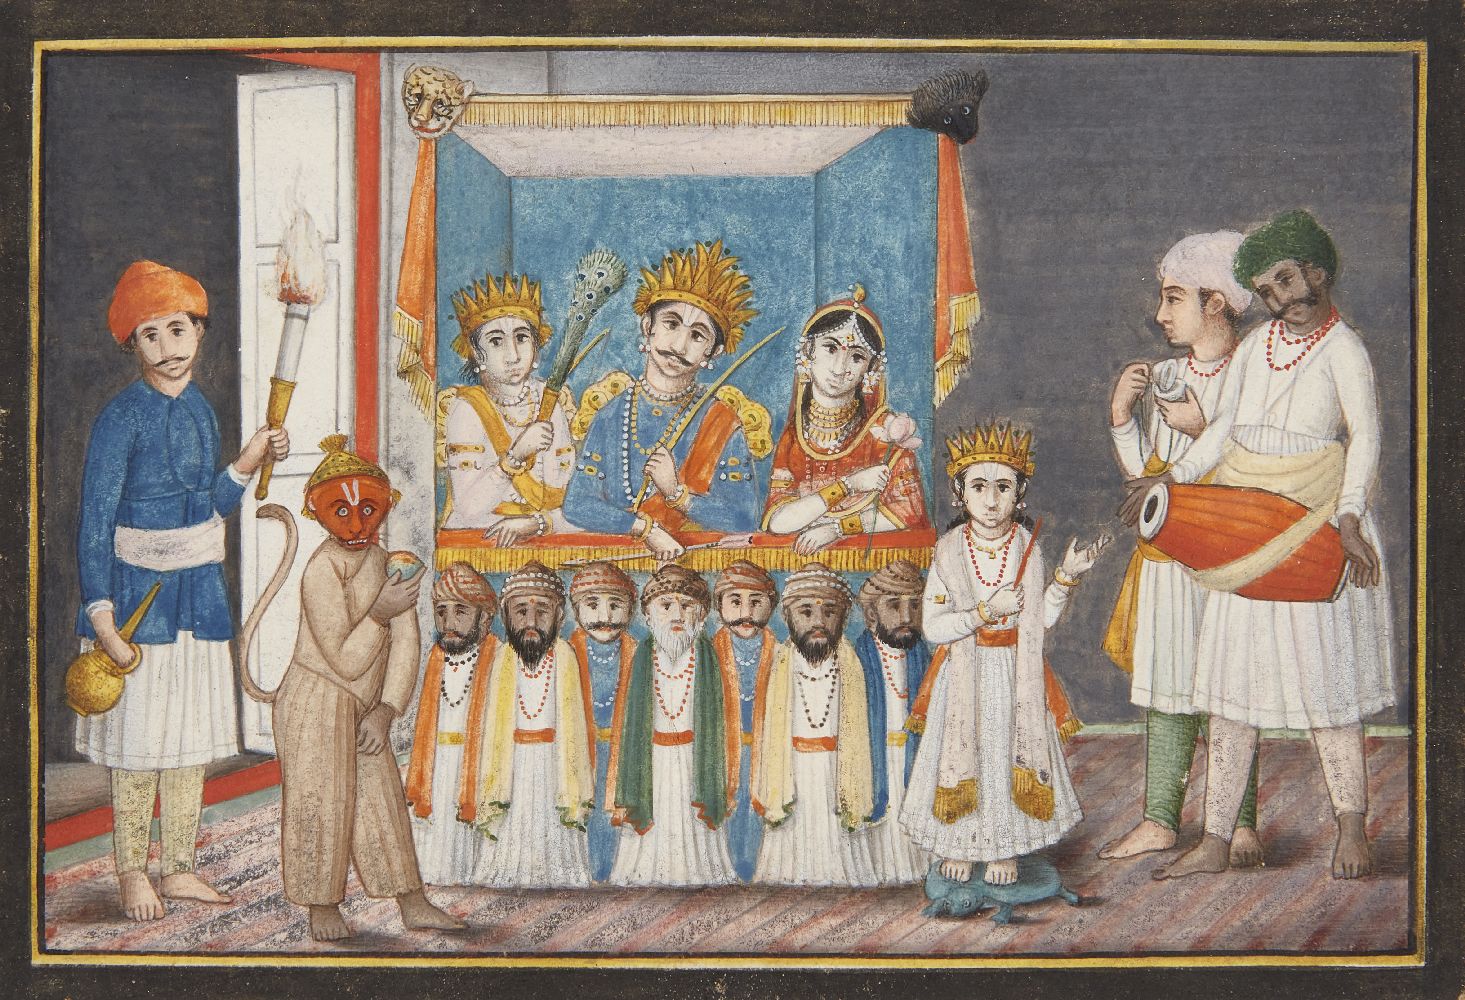 Performers under a canopy, Lucknow School, India inscribed 24 June 1793 to reverse, gouache on paper